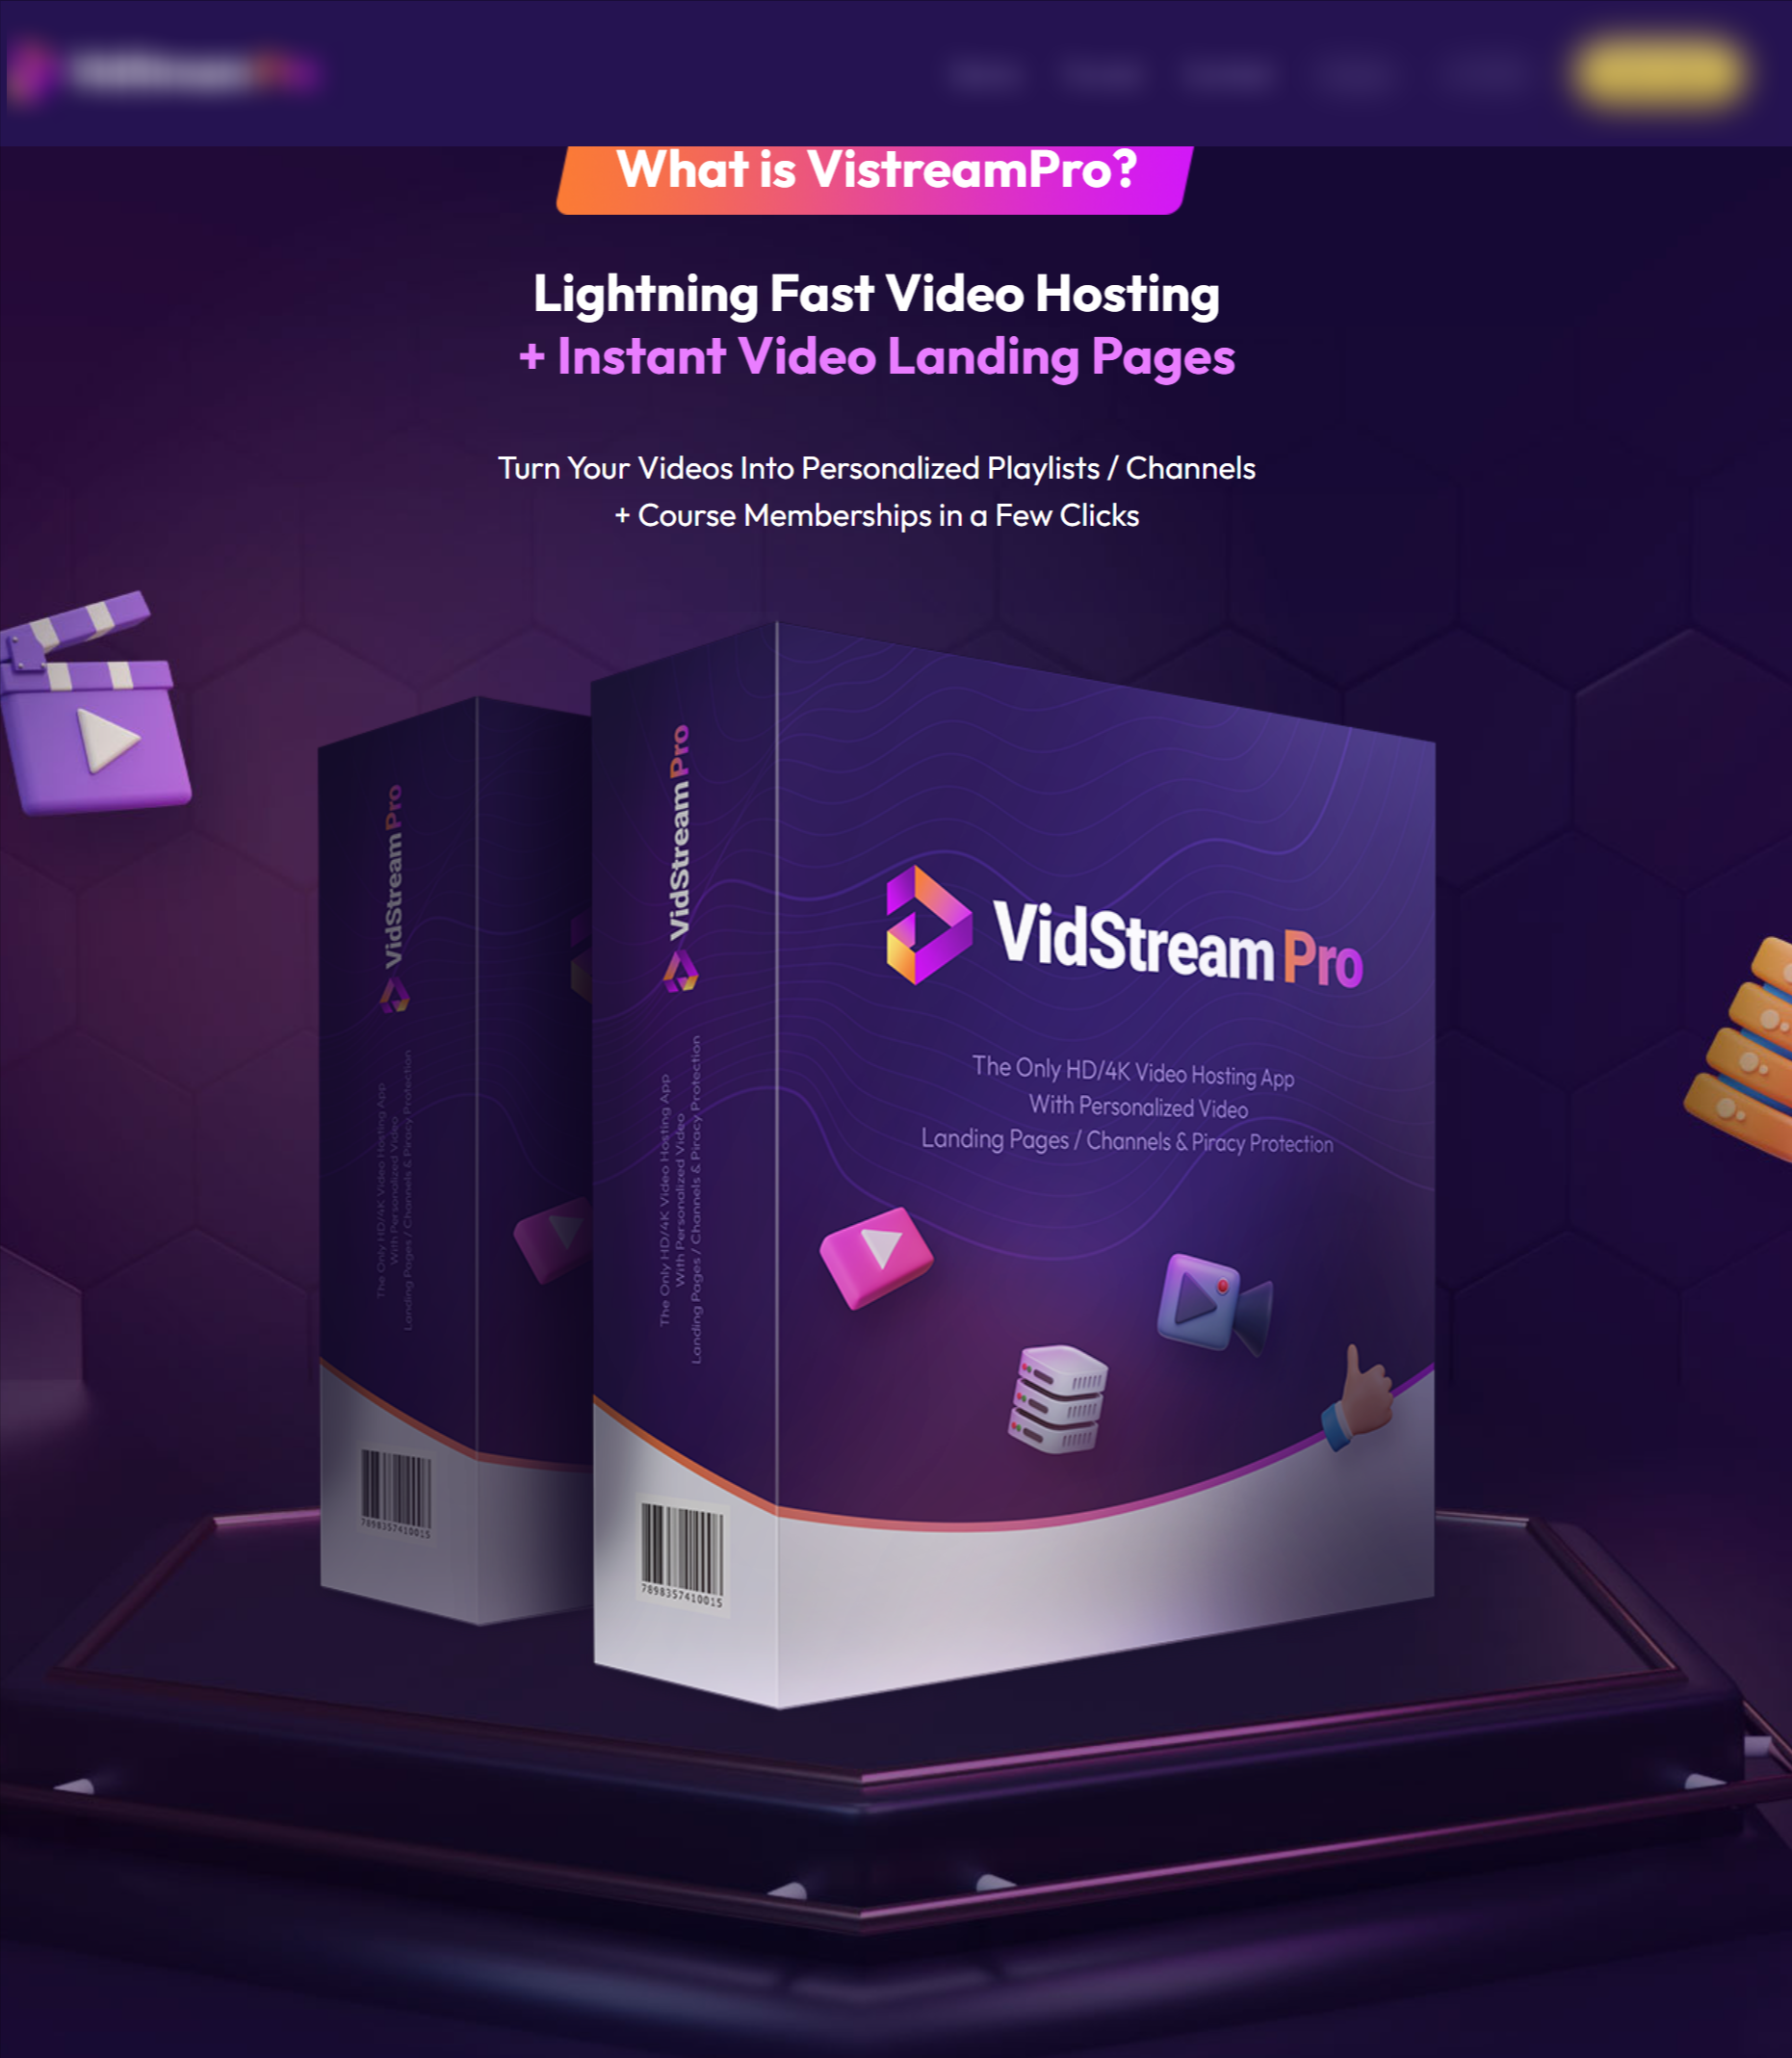 vidstream pro Vidstream Pro Review: The Only HD/4K Video Hosting App With Instant Landing Pages Create Channels - Sell Courses - Video Memberships